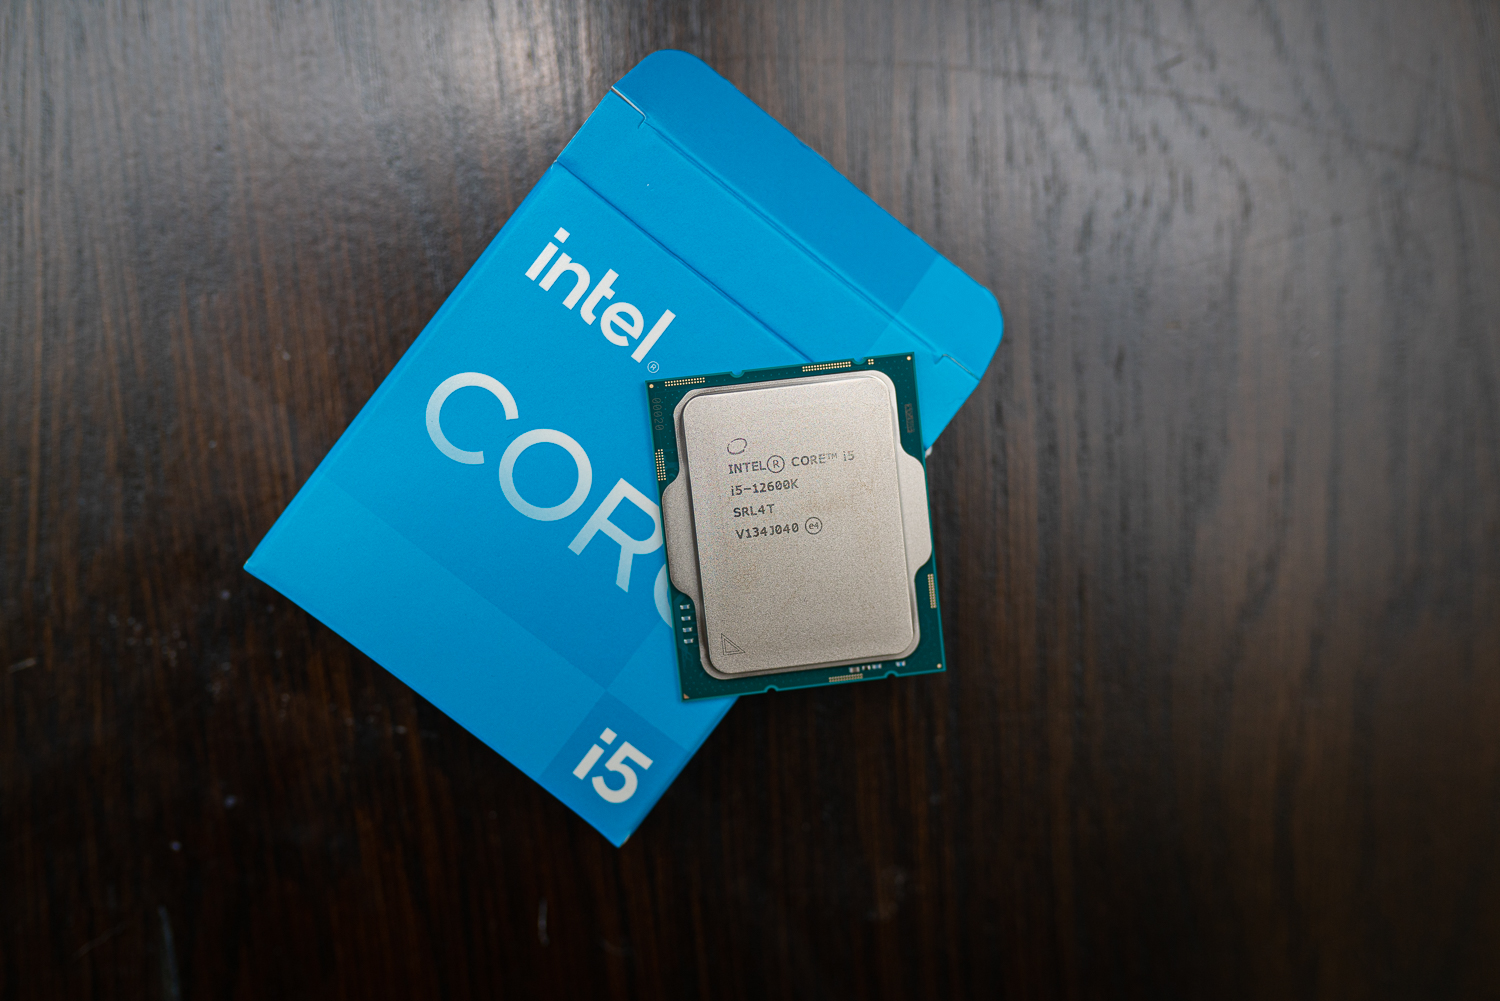 Product  Intel Core i5 12600K / 3.7 GHz processor - Box (without